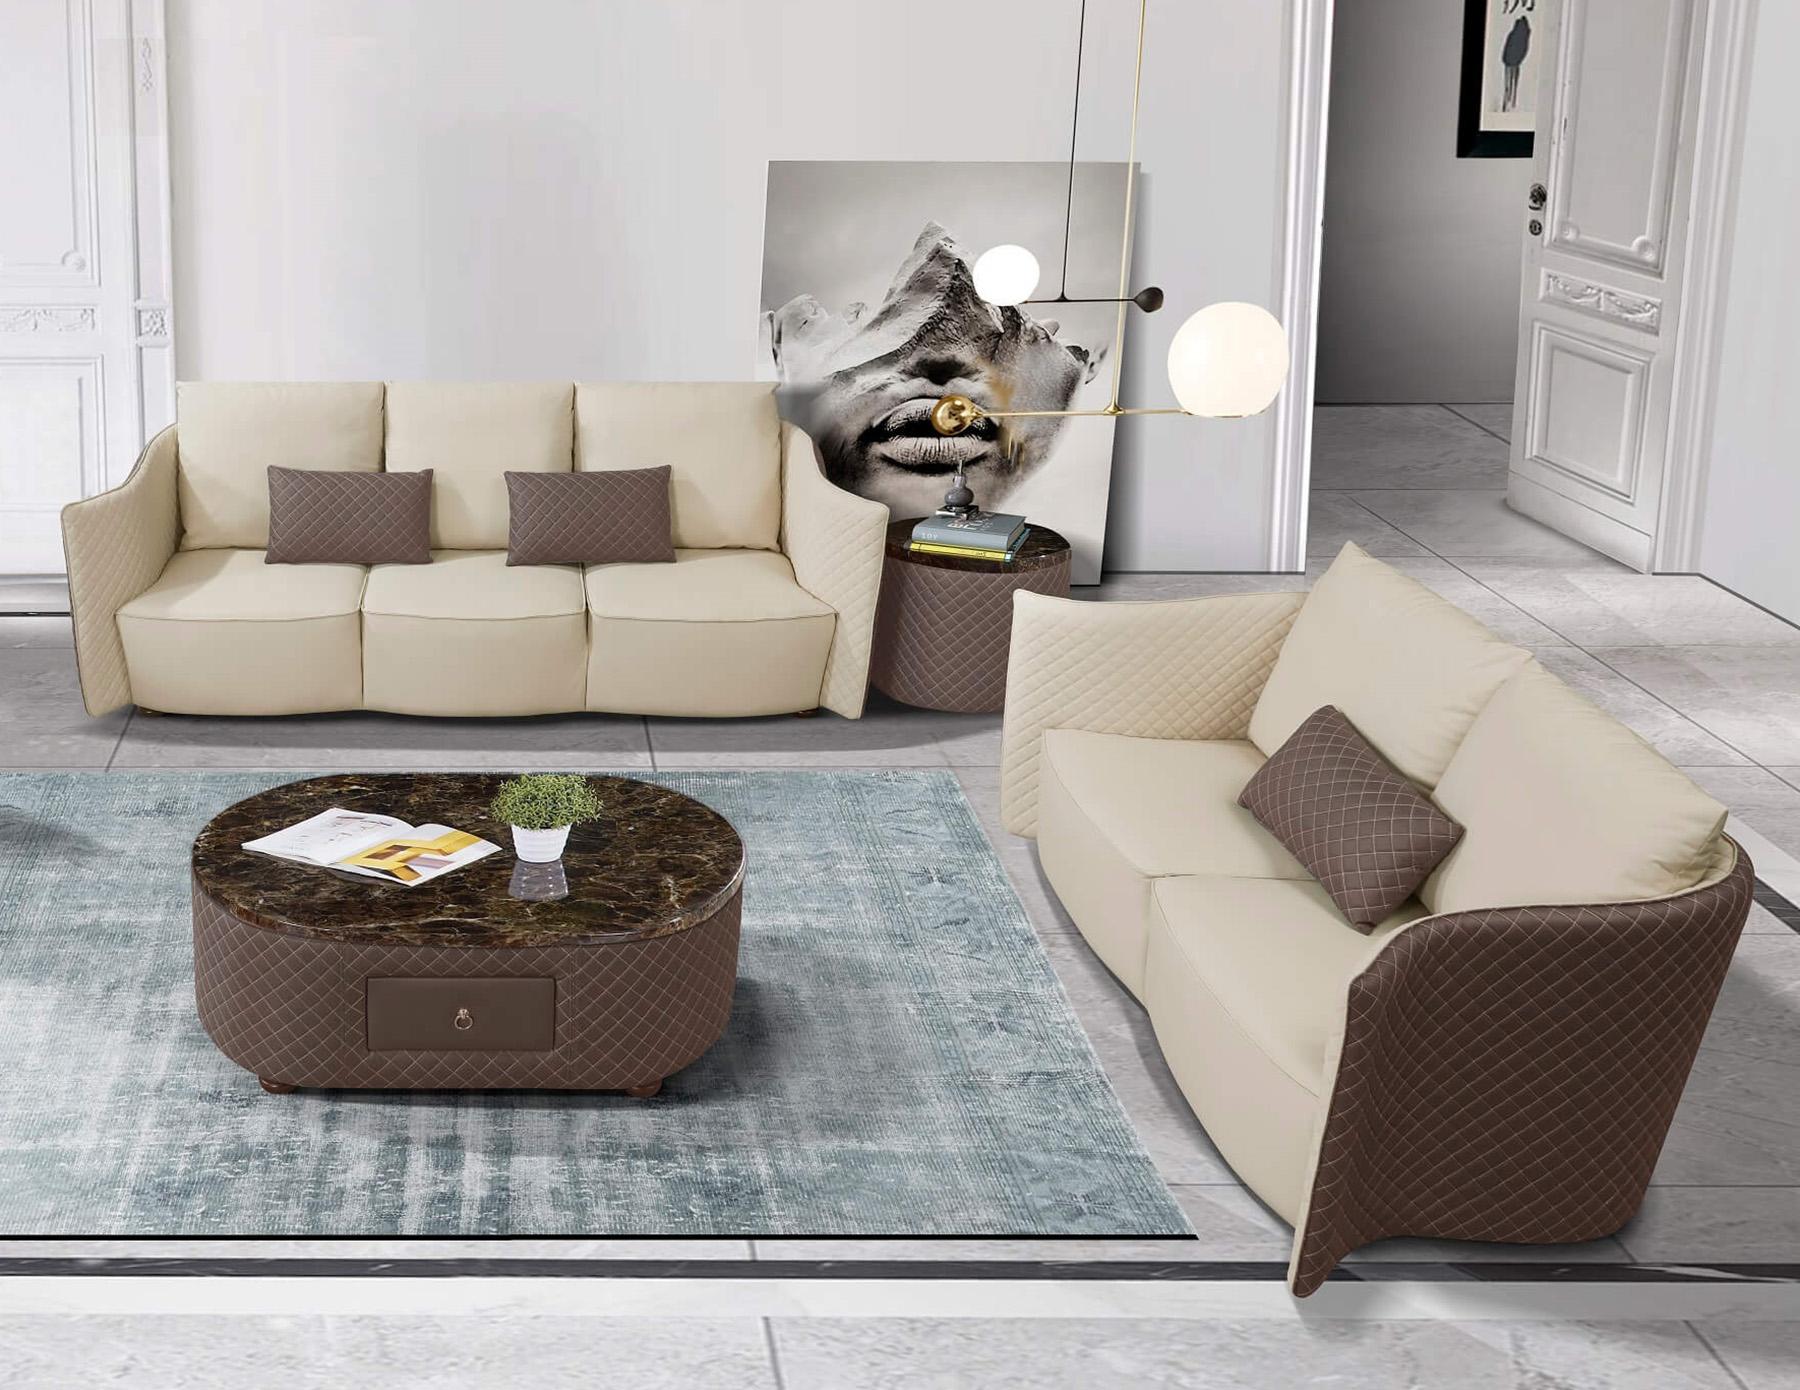 Contemporary, Modern Coffee Table Set MAKASSAR EF-52550-CT-Set-2 in Light Grey, Taupe Italian Leather